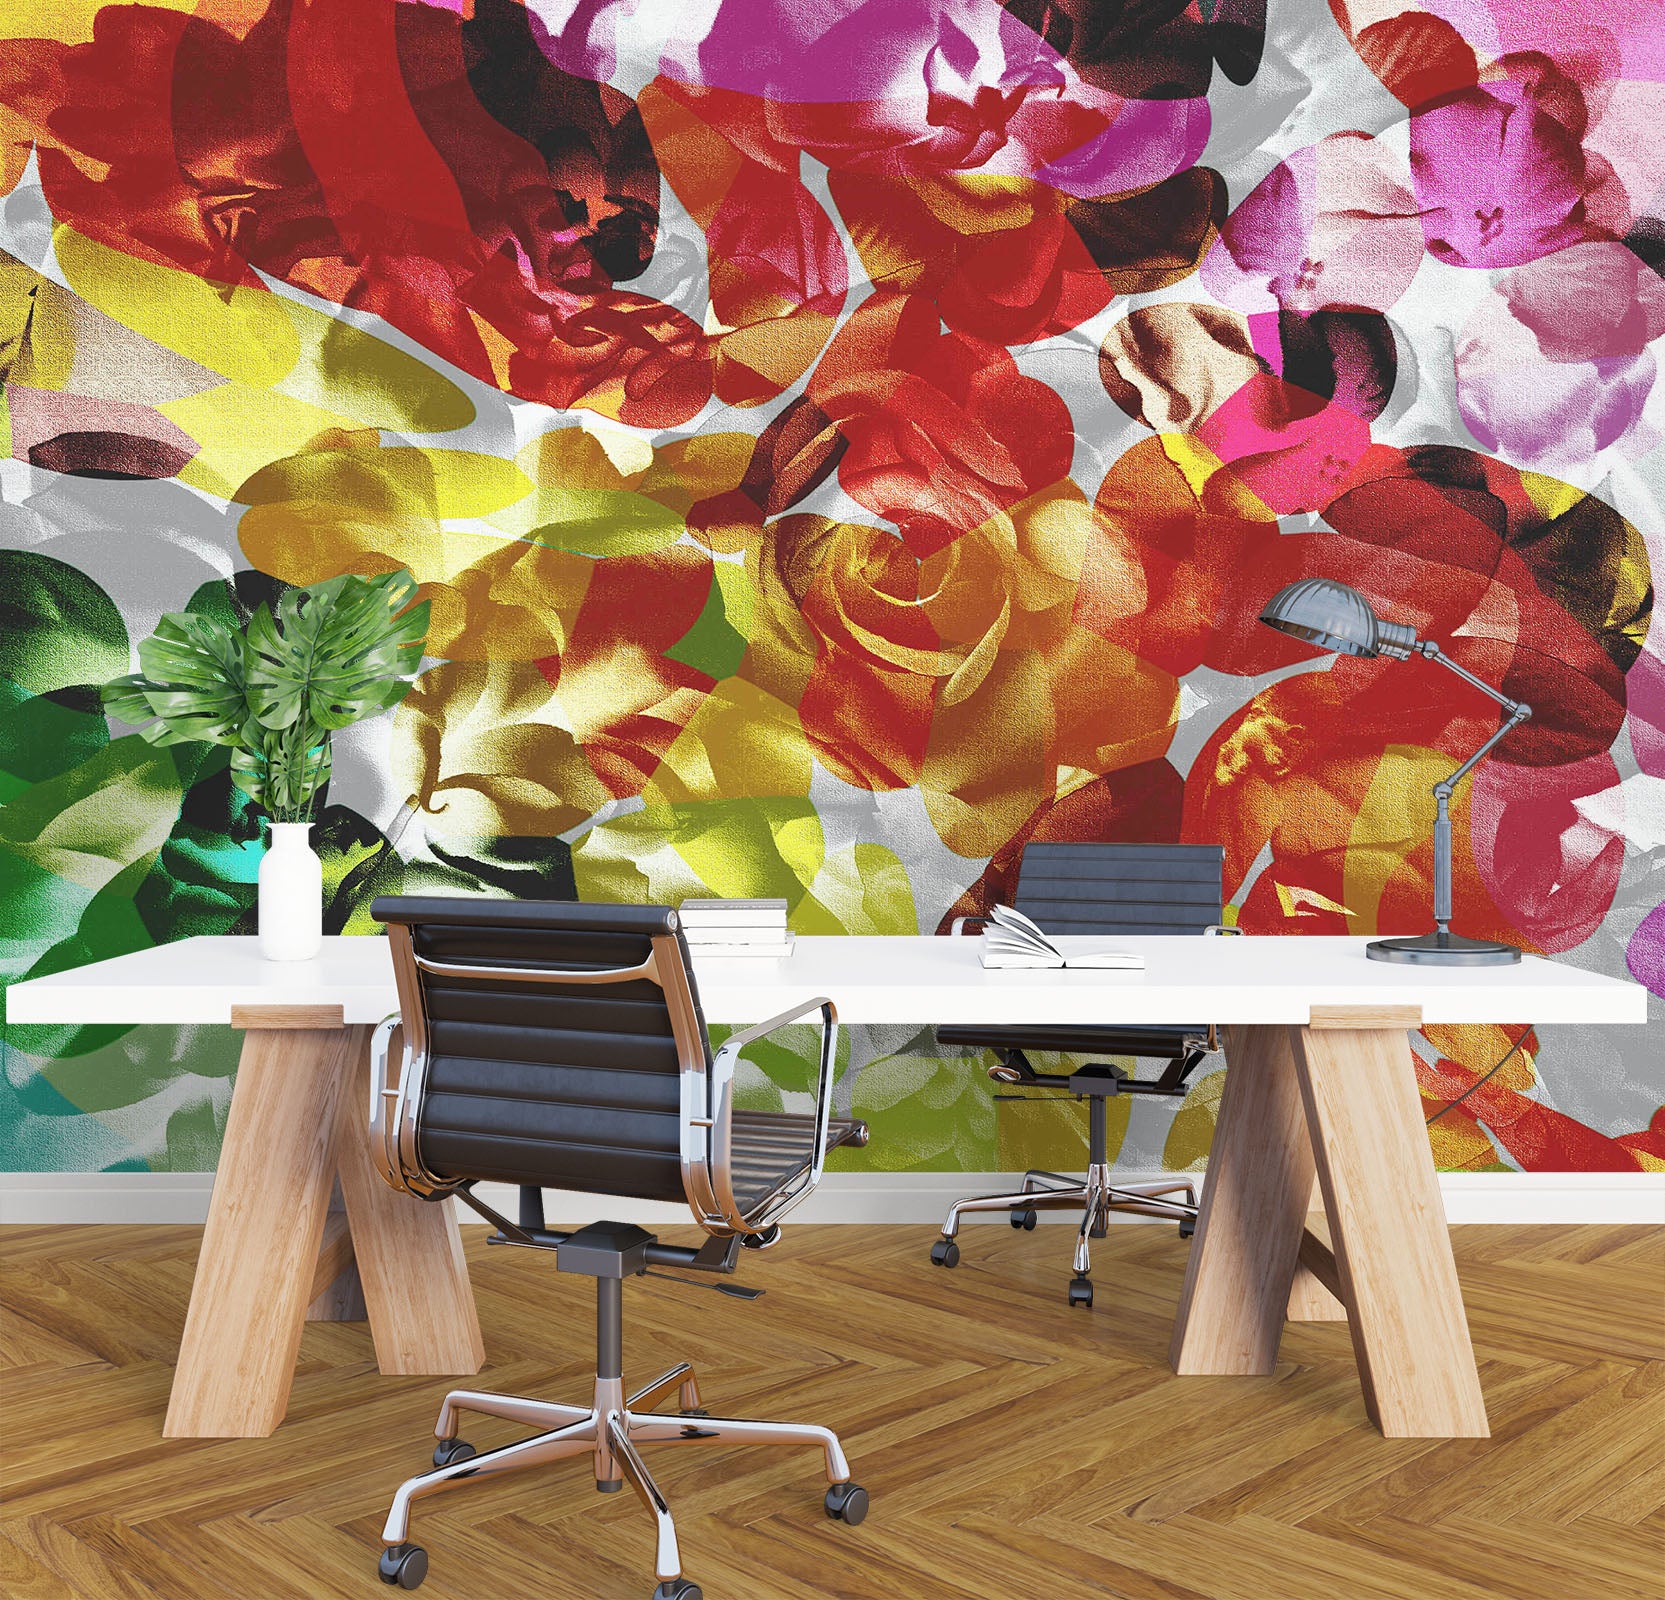 3D Colored Flowers 19104 Shandra Smith Wall Mural Wall Murals